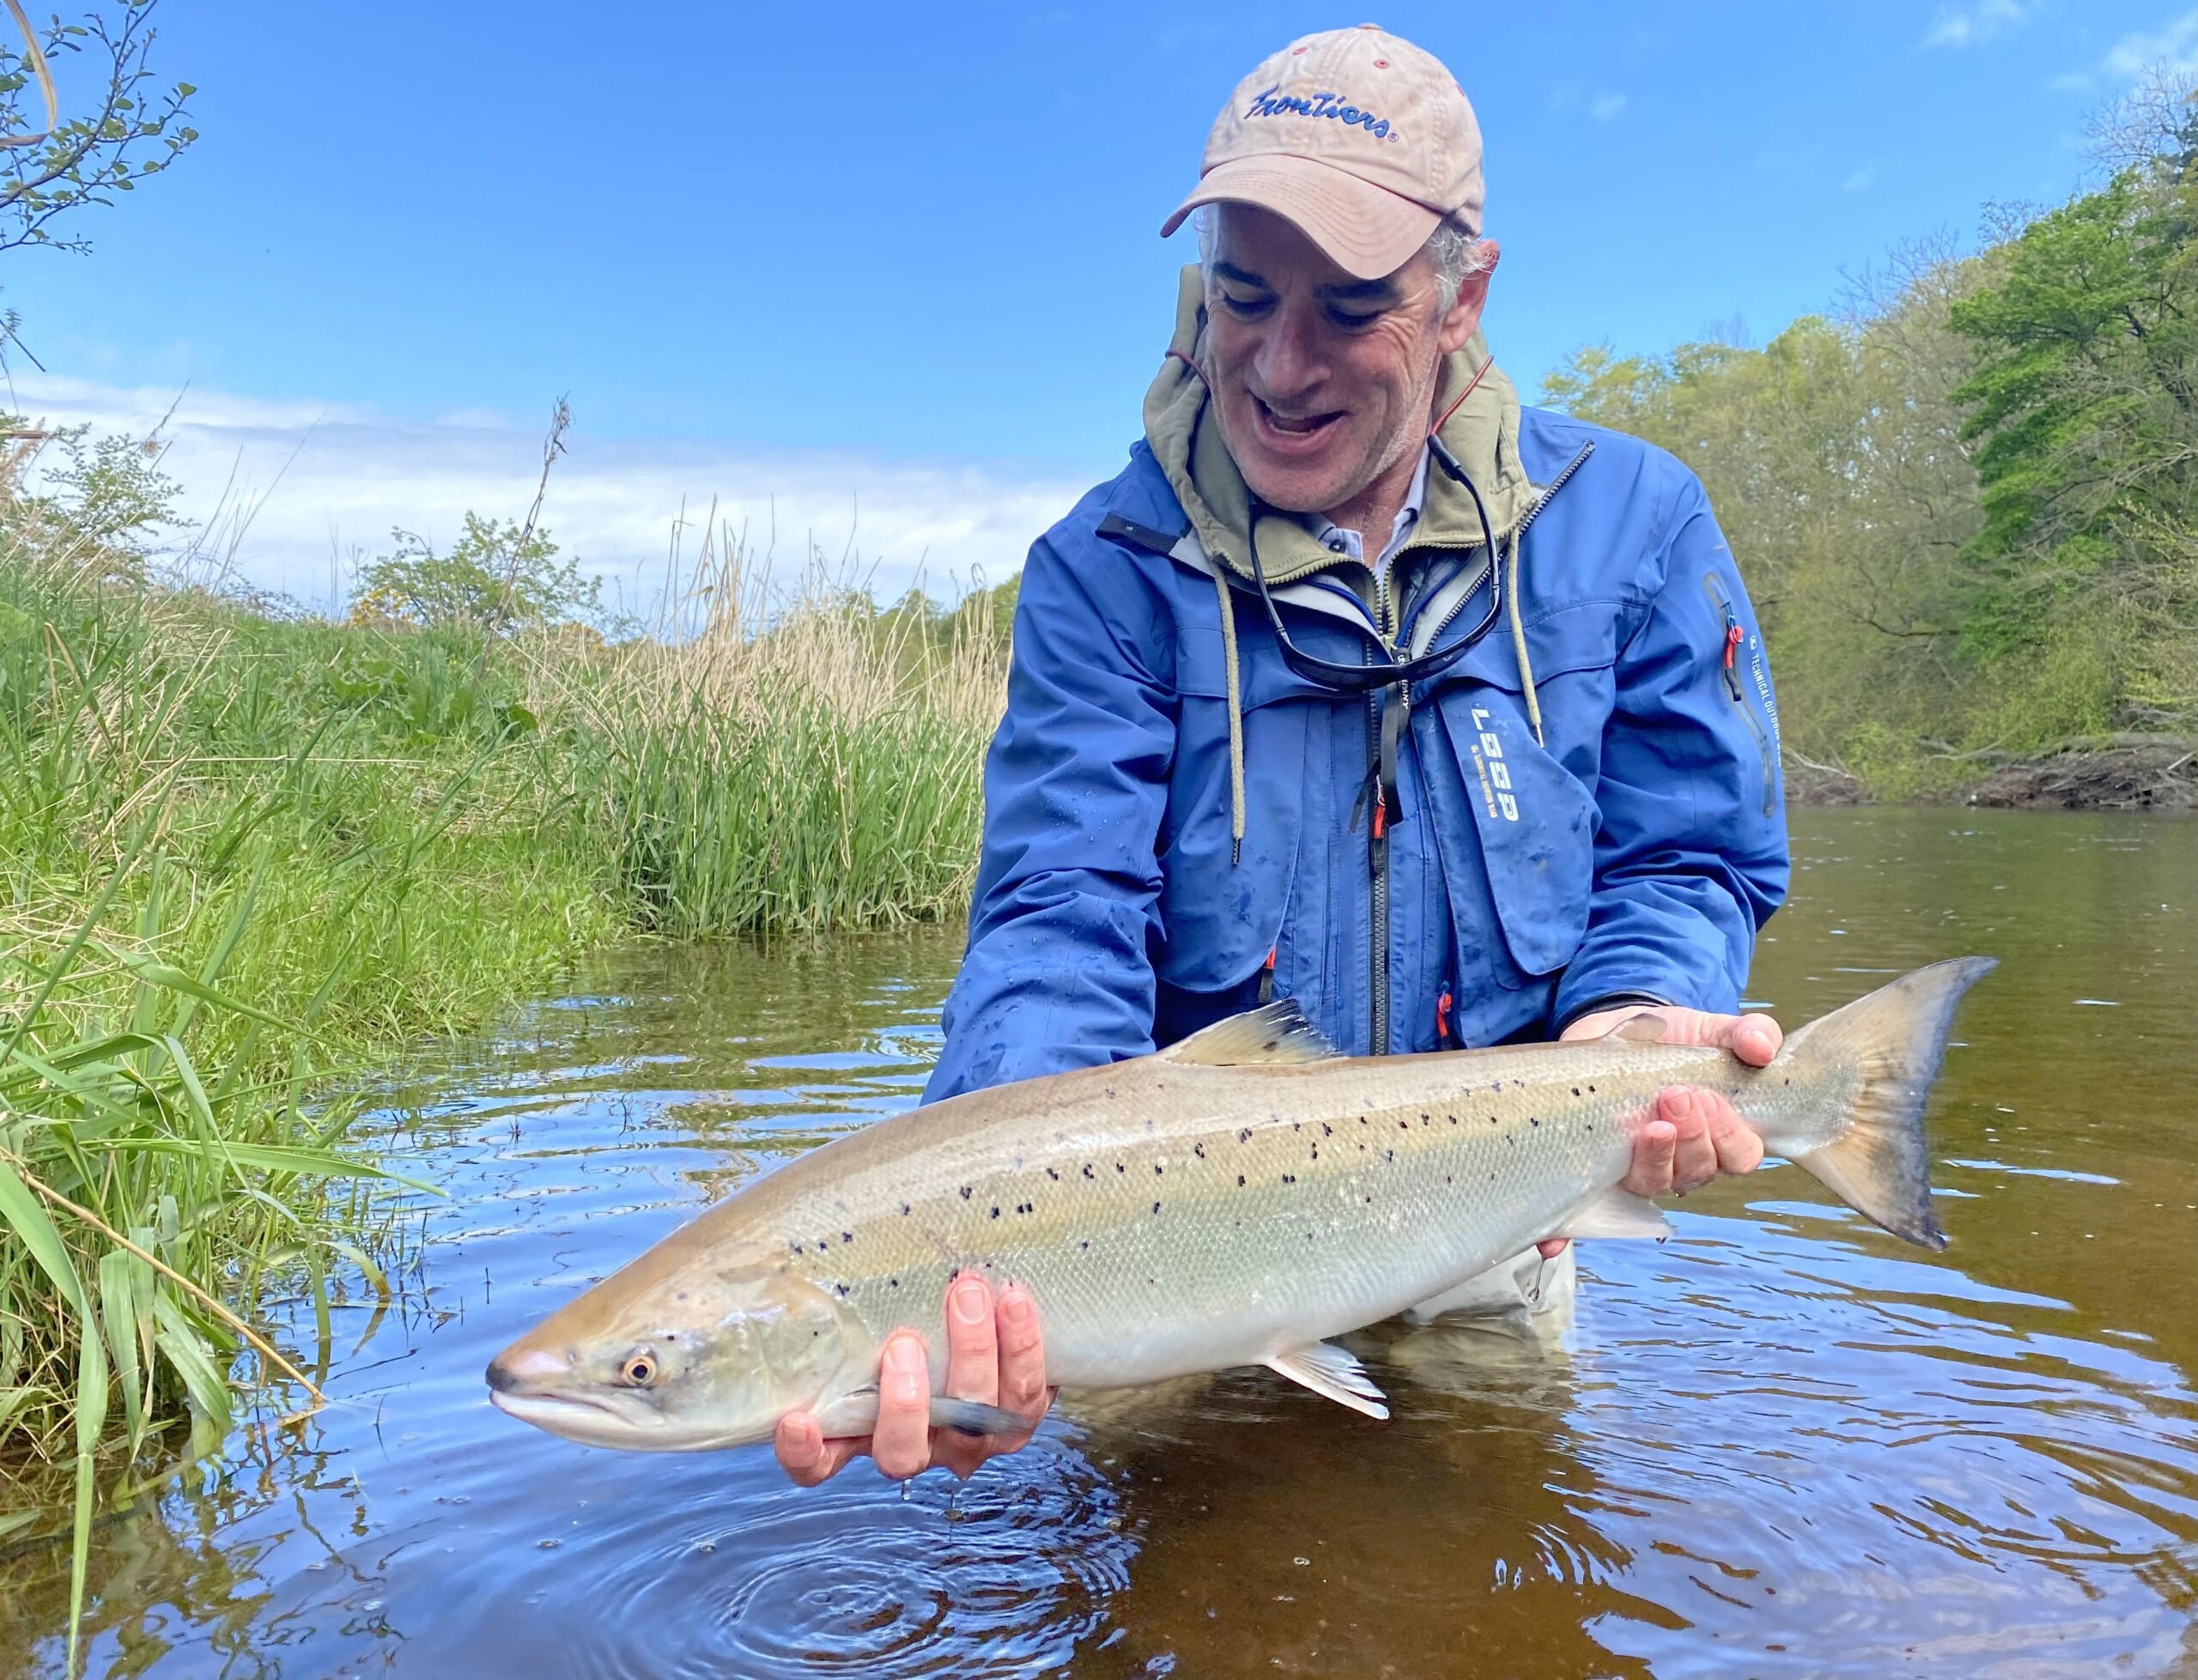 Chasing Fins - Fly Fishing Holidays & Guiding in Northumberland